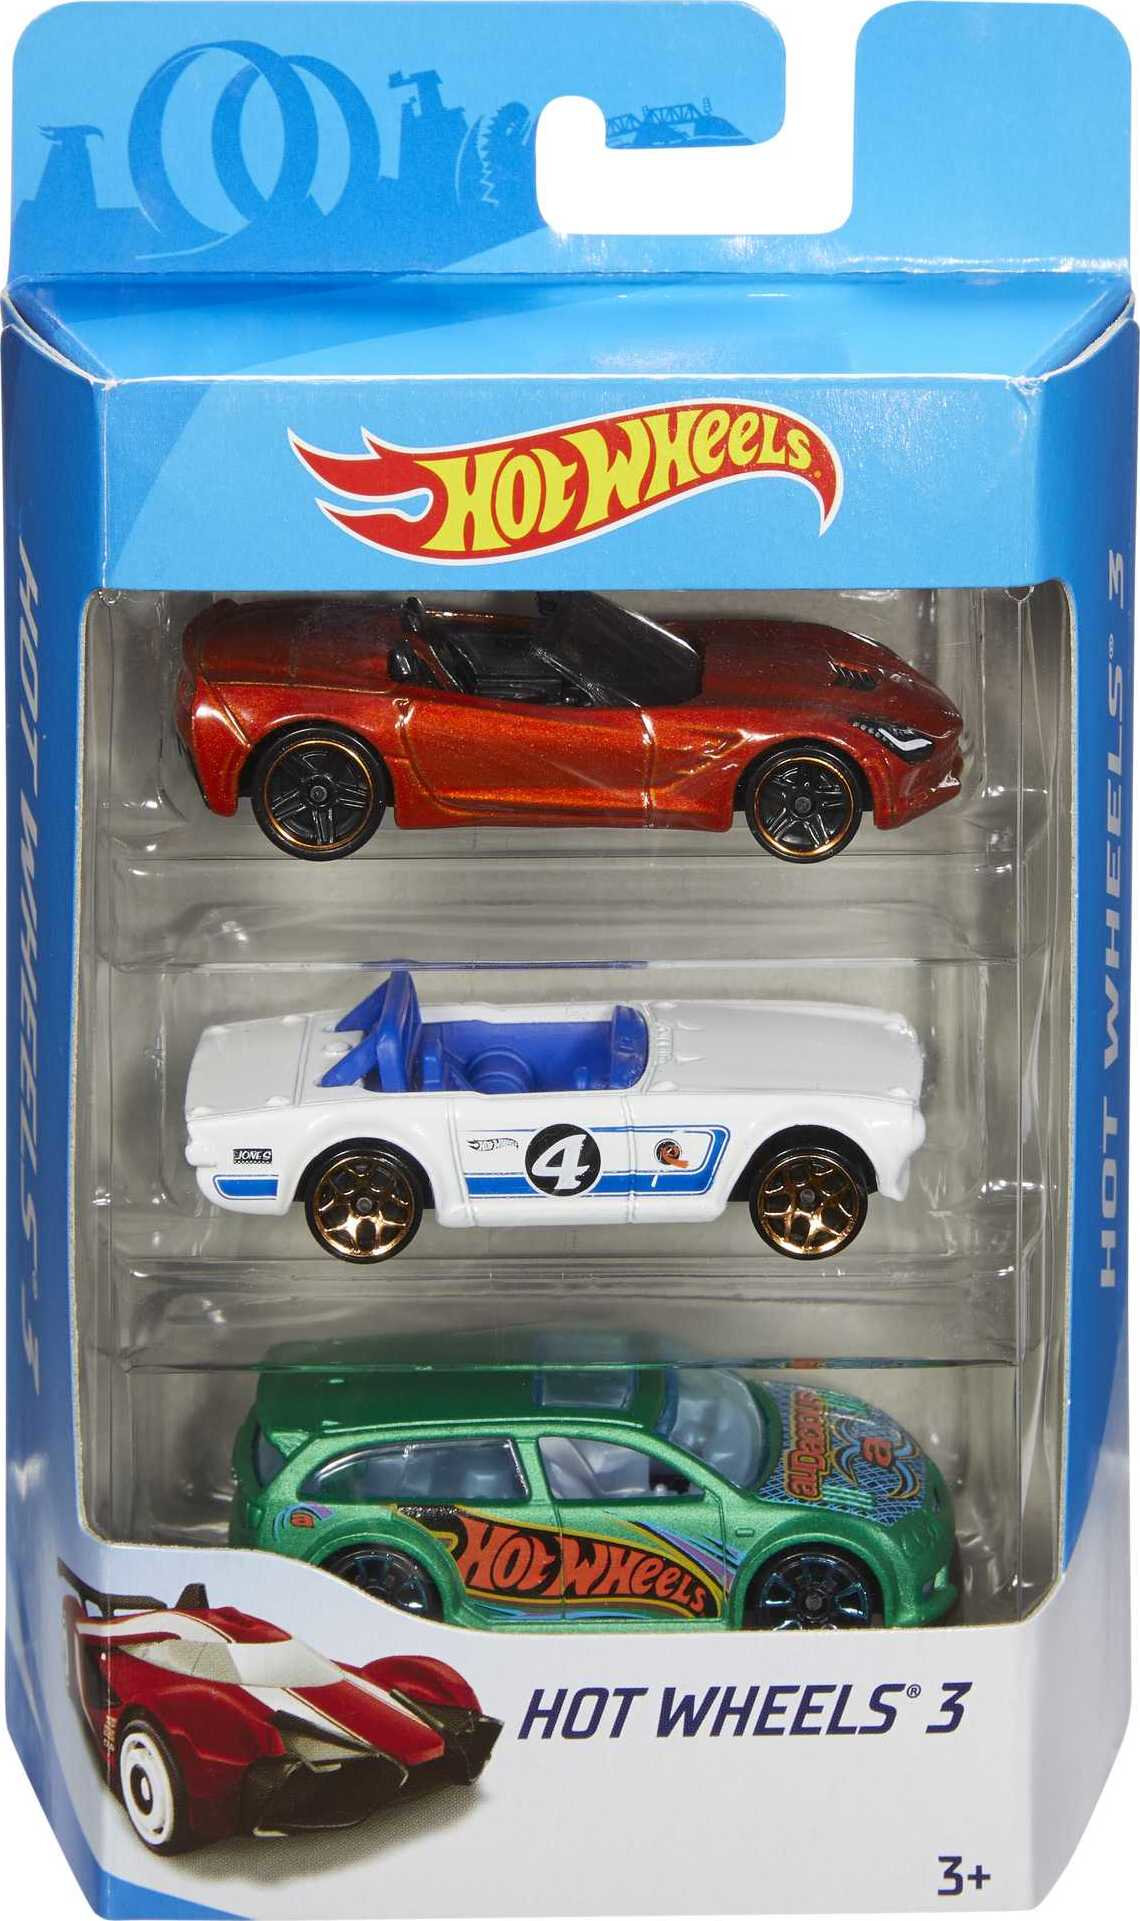 Hot Wheels 3-Car Pack, Multipack of 3 Hot Wheels Vehicles, Gift for Kids 3 Years & Up (Styles May Vary) - image 5 of 6